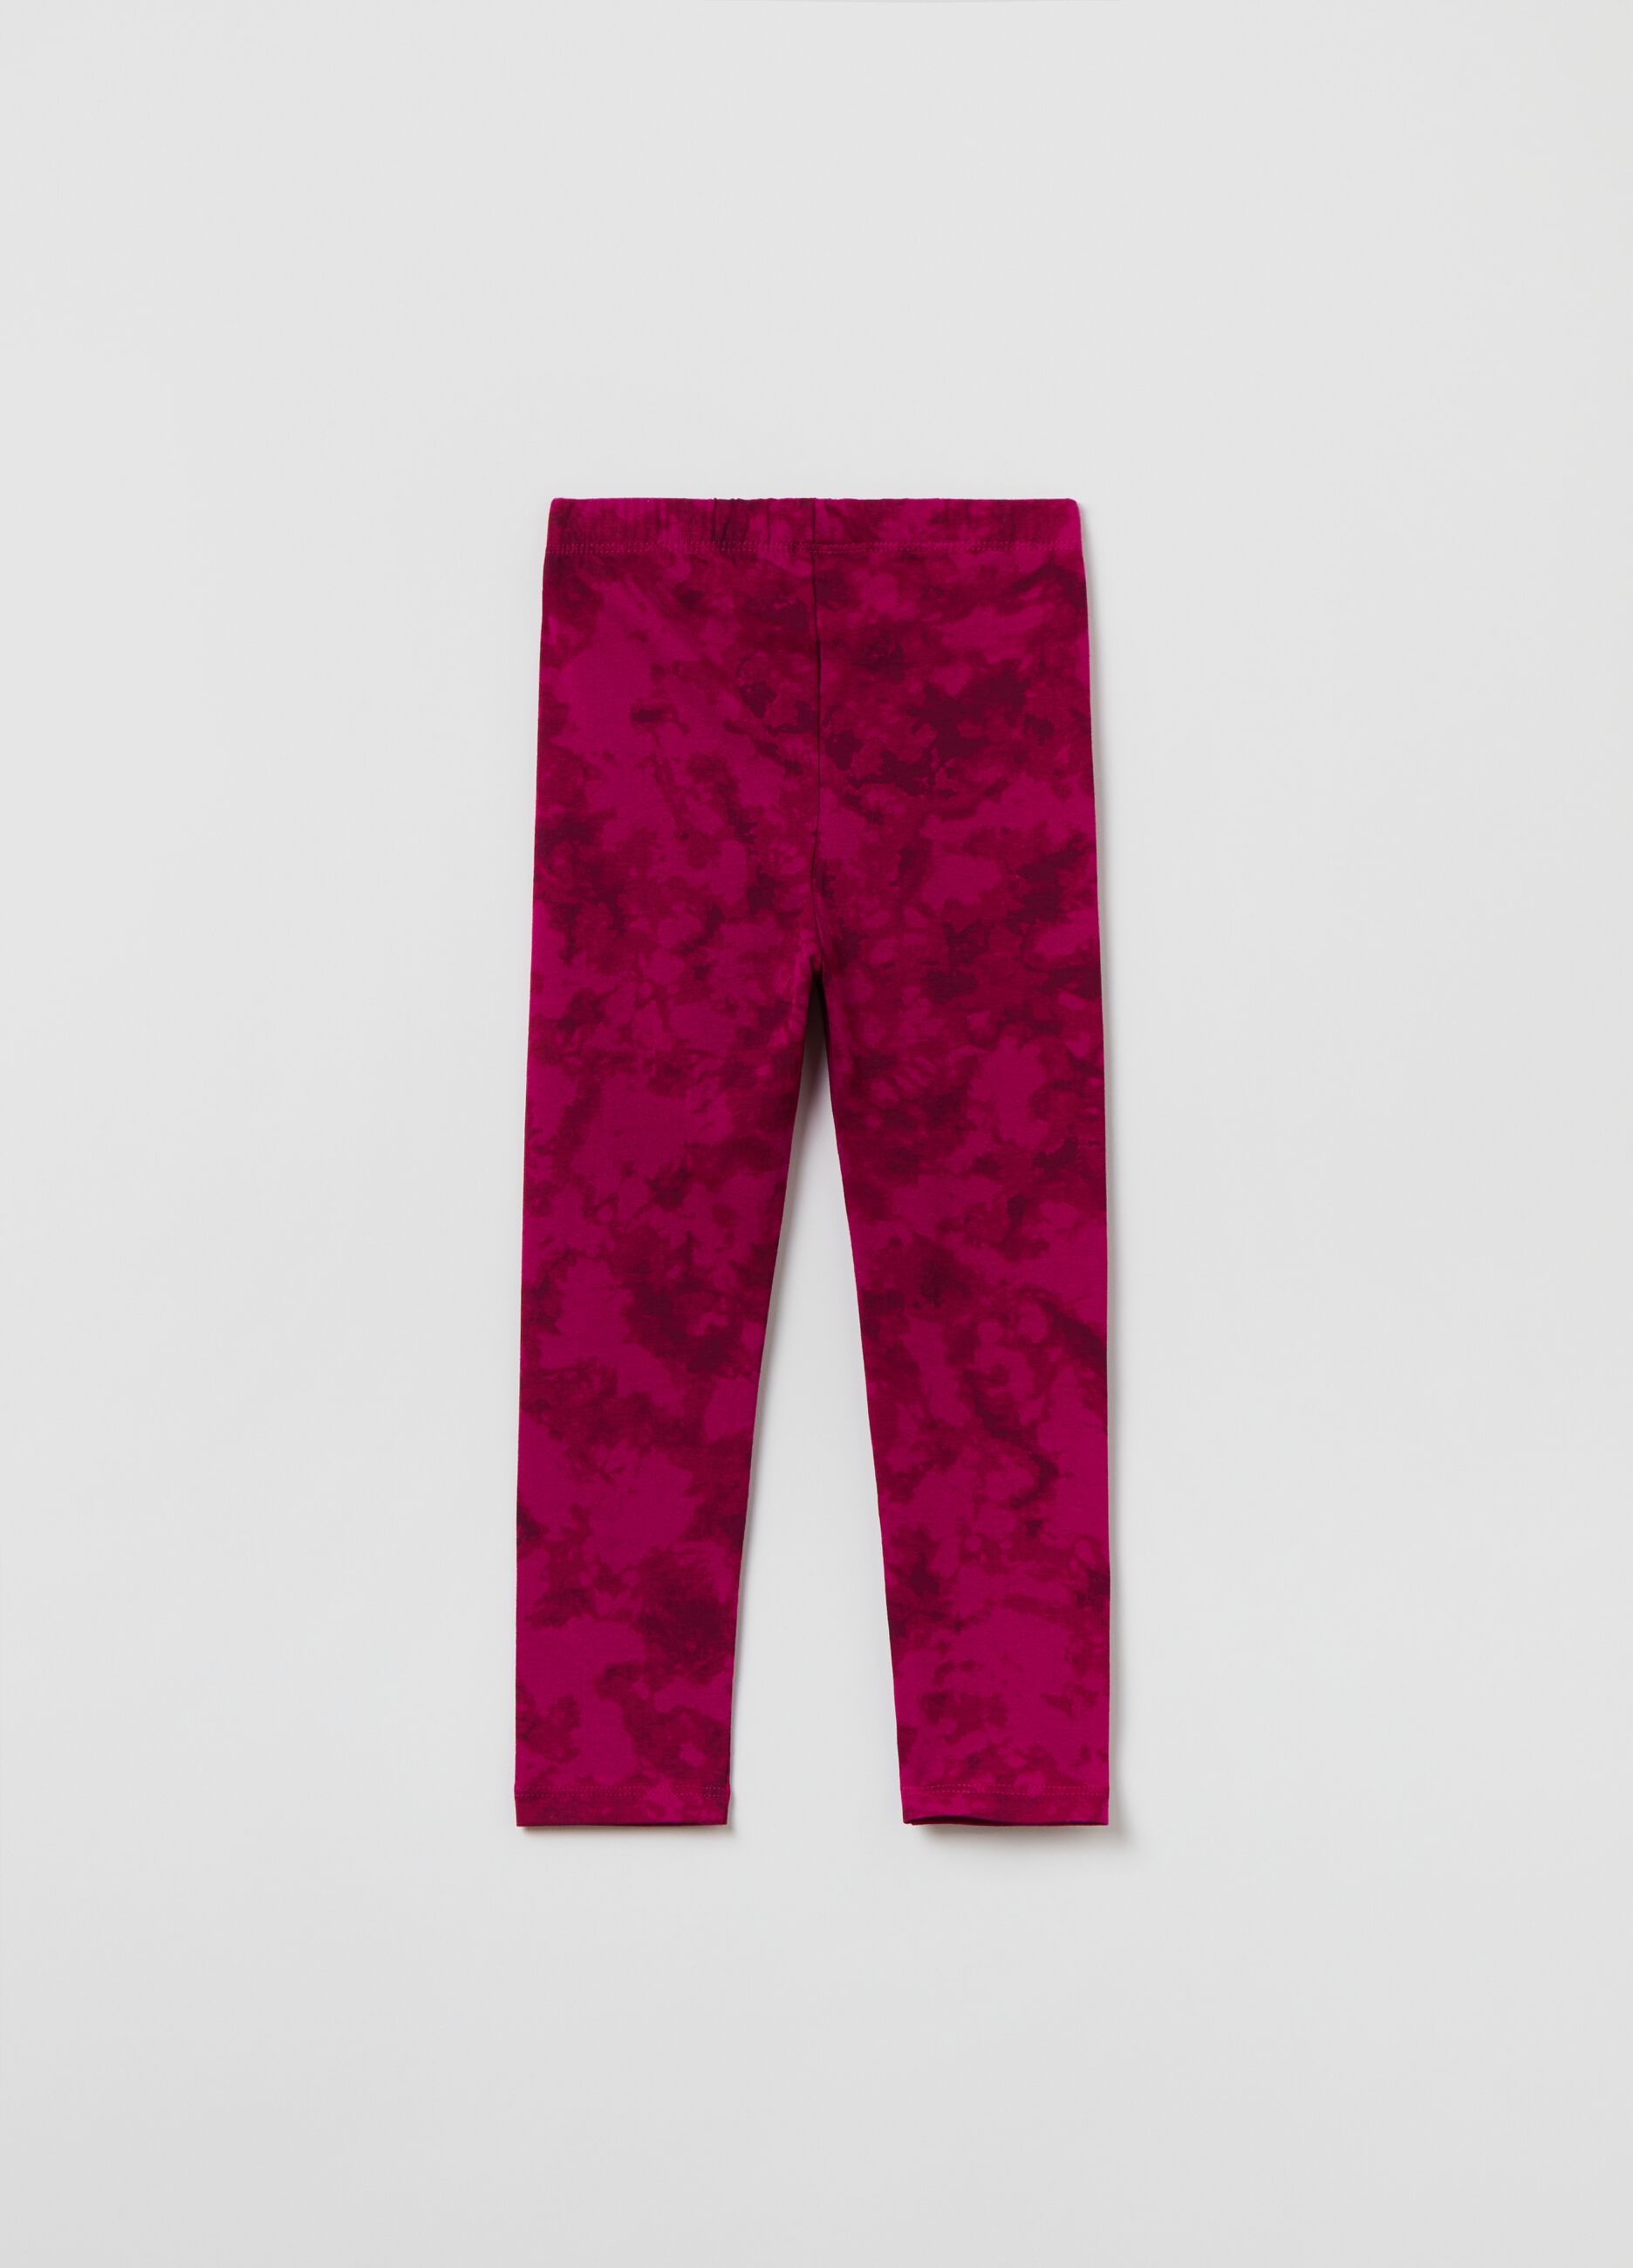 Leggings with Tie Dye print and teddy bear embroidery